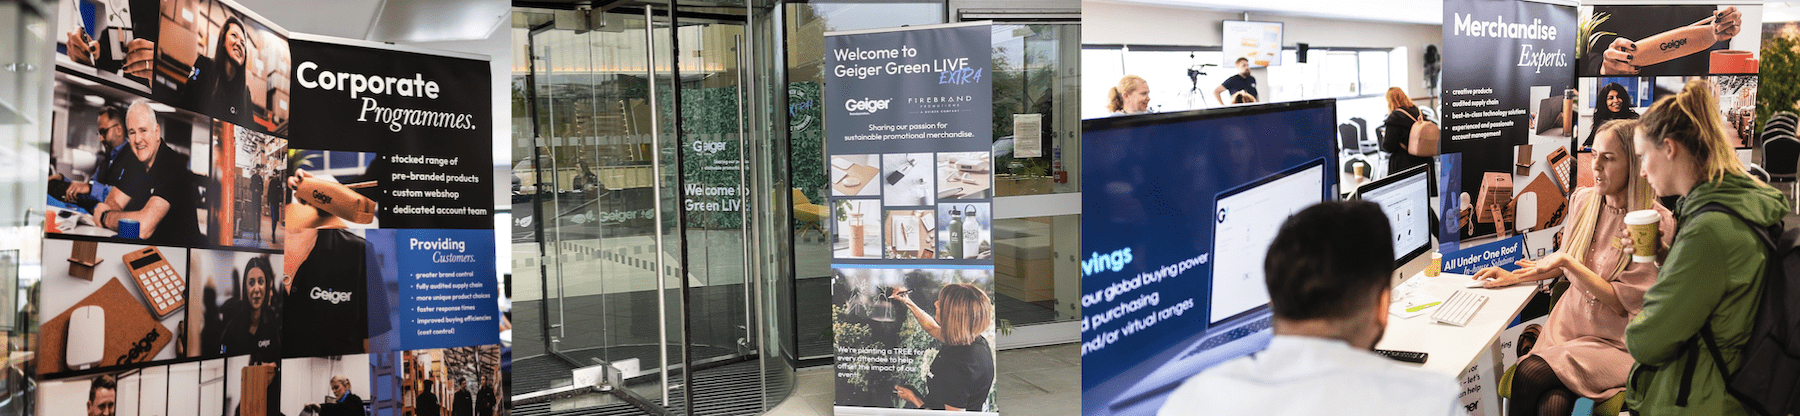 branded banners, backdrop and event props from Geiger promotional merchandise